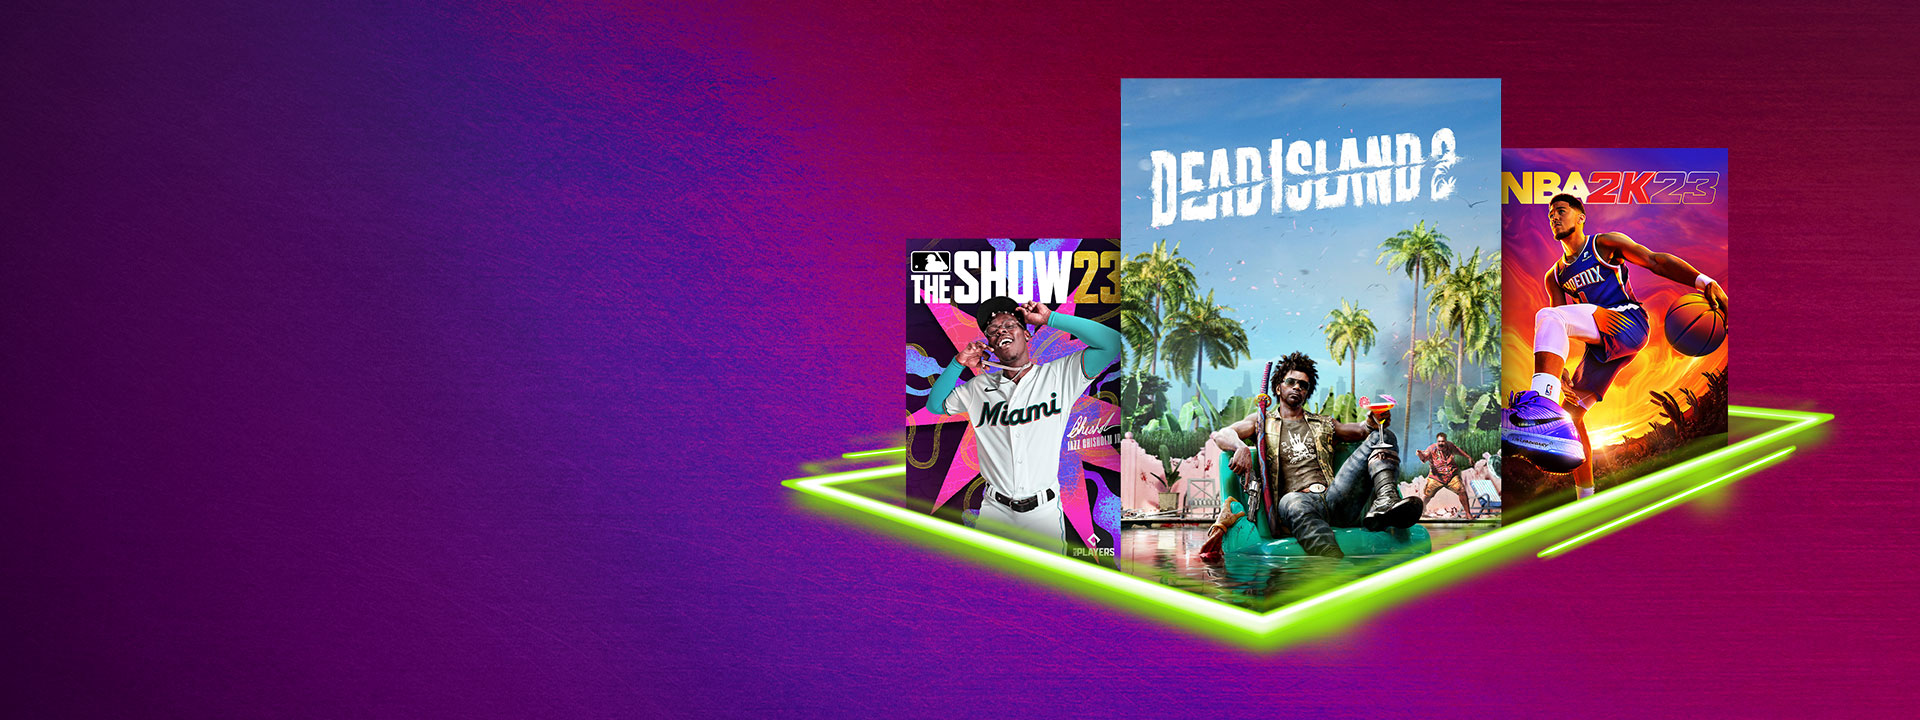 Box art from games that are part of the Deals Unlocked sale, including Dead Island 2, MLB® The Show™ 23 Xbox Series X|S, and NBA 2K23 for Xbox Series X|S.